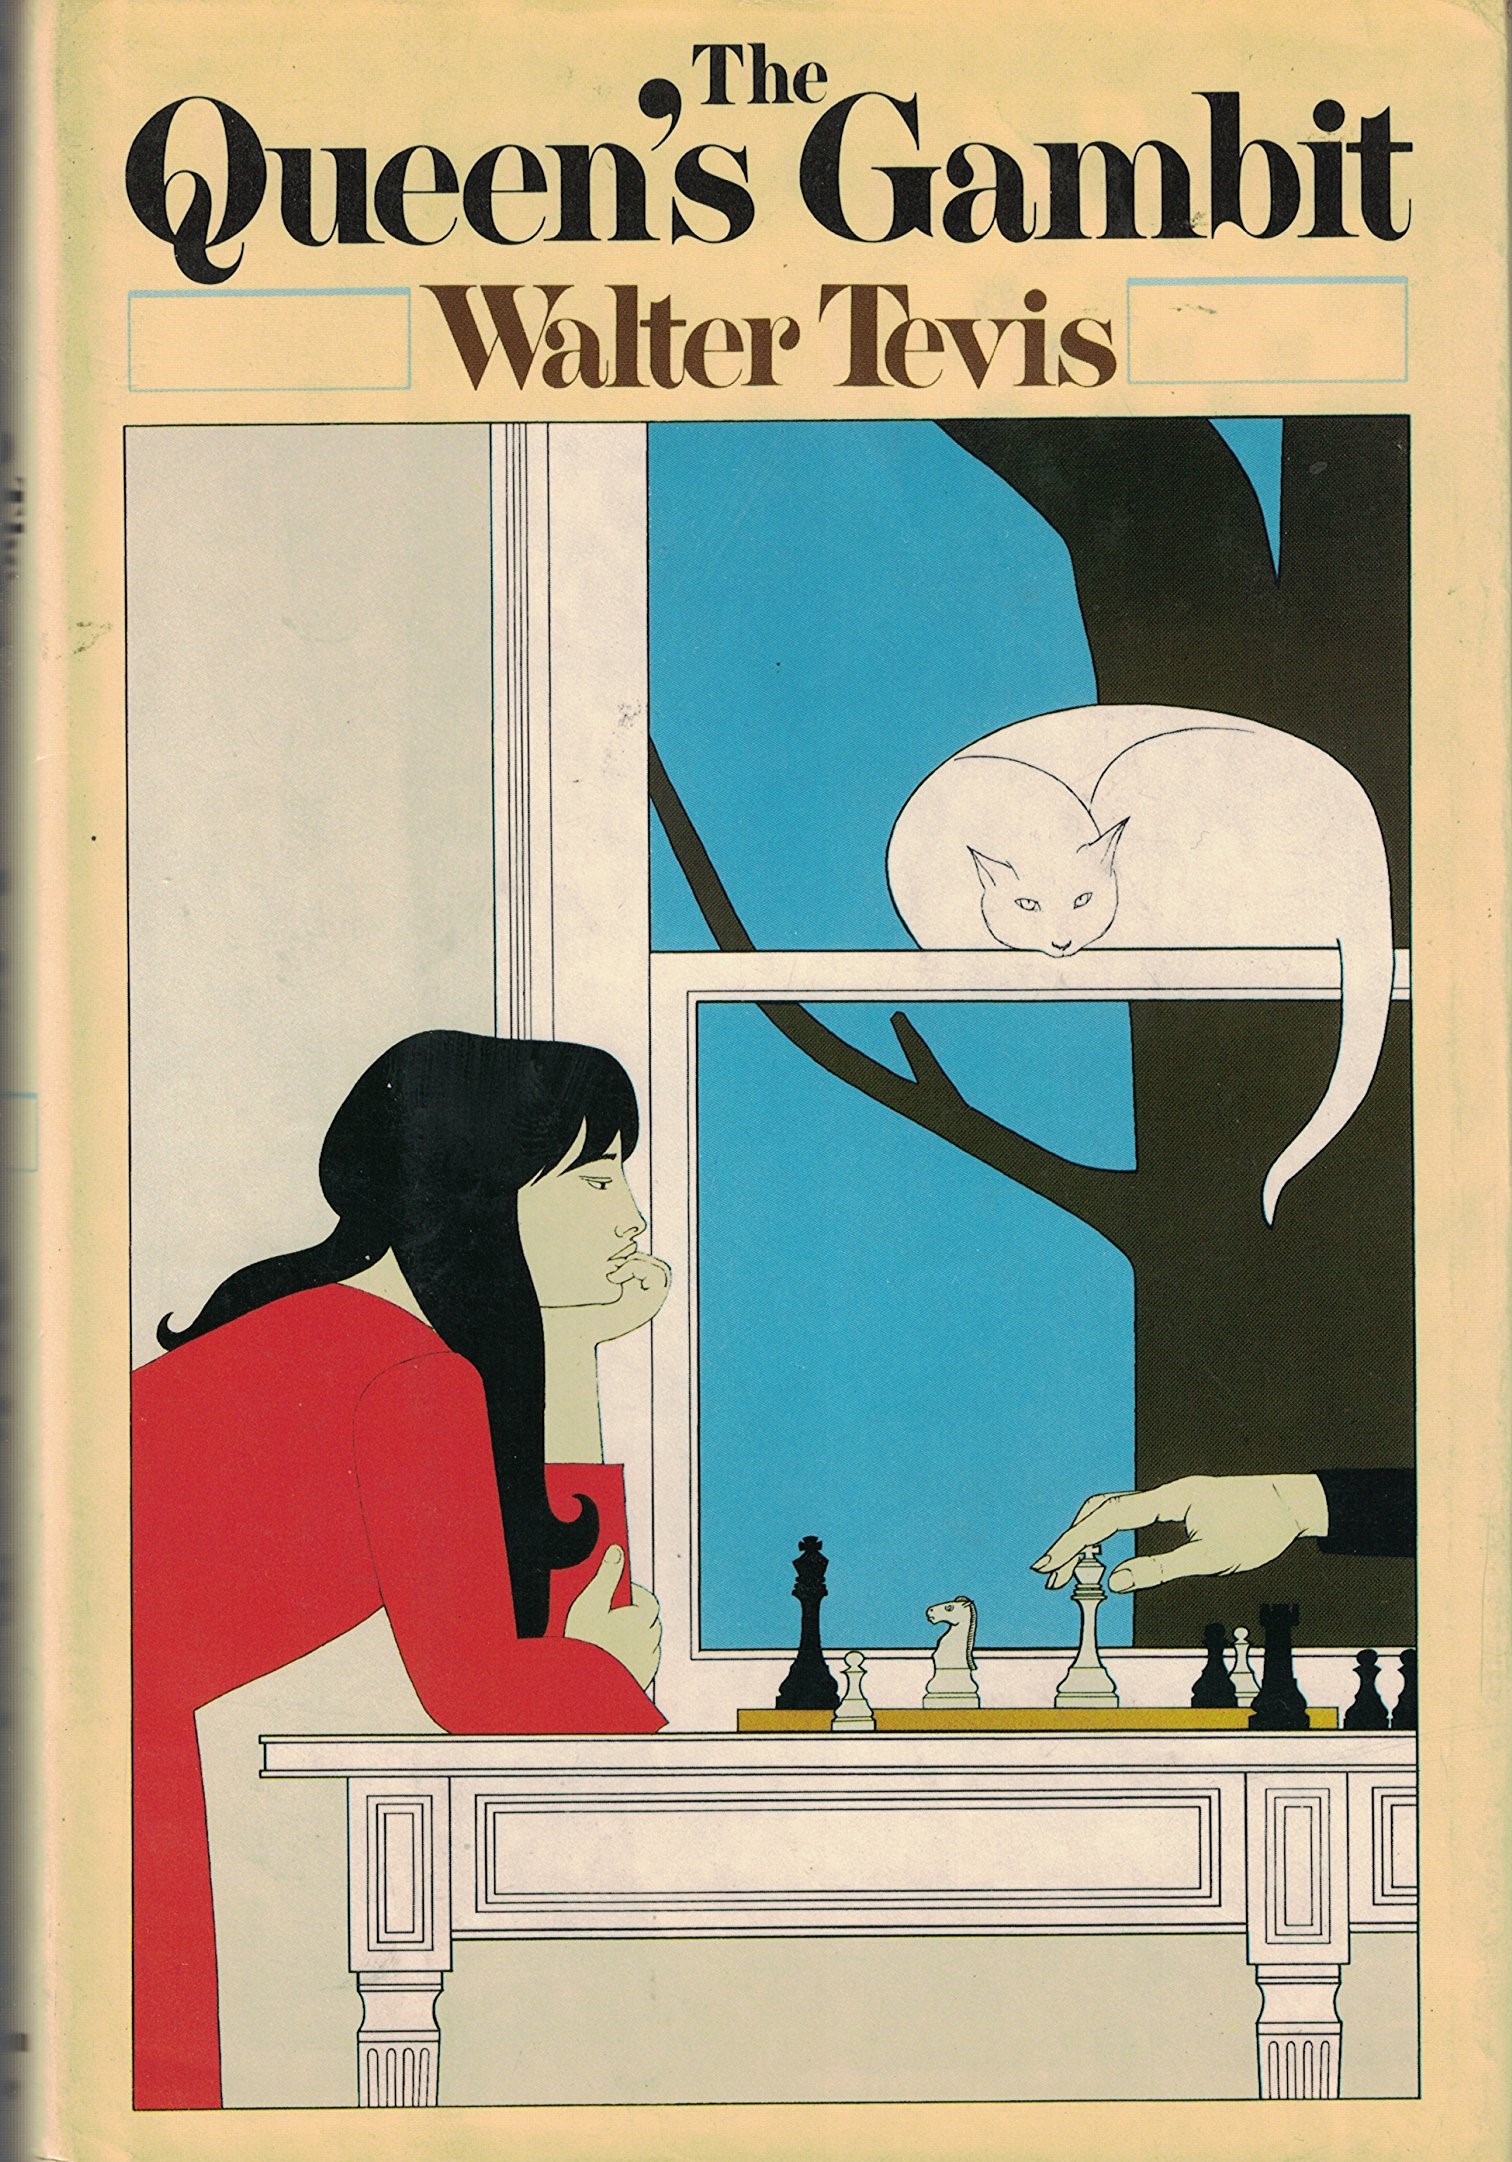 Novel cover for "The Queen's Gambit," a young woman with long black hair faces an opponent while playing a game of chess in front of window facing the the trunk of a tree. There is also a white cat sitting in the window sill overlooking the chess match.